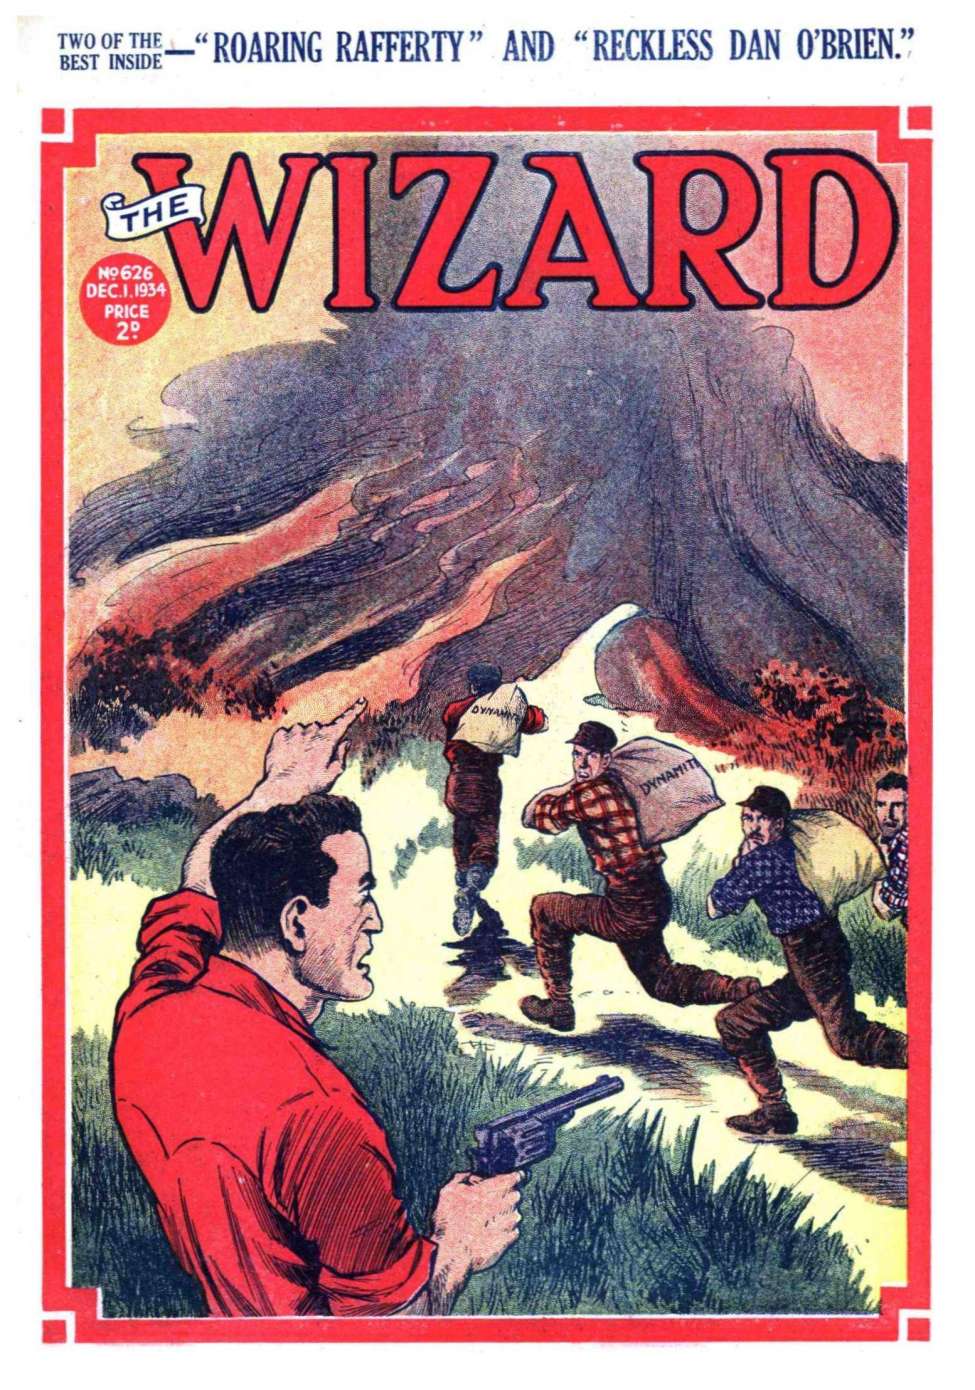 Book Cover For The Wizard 626